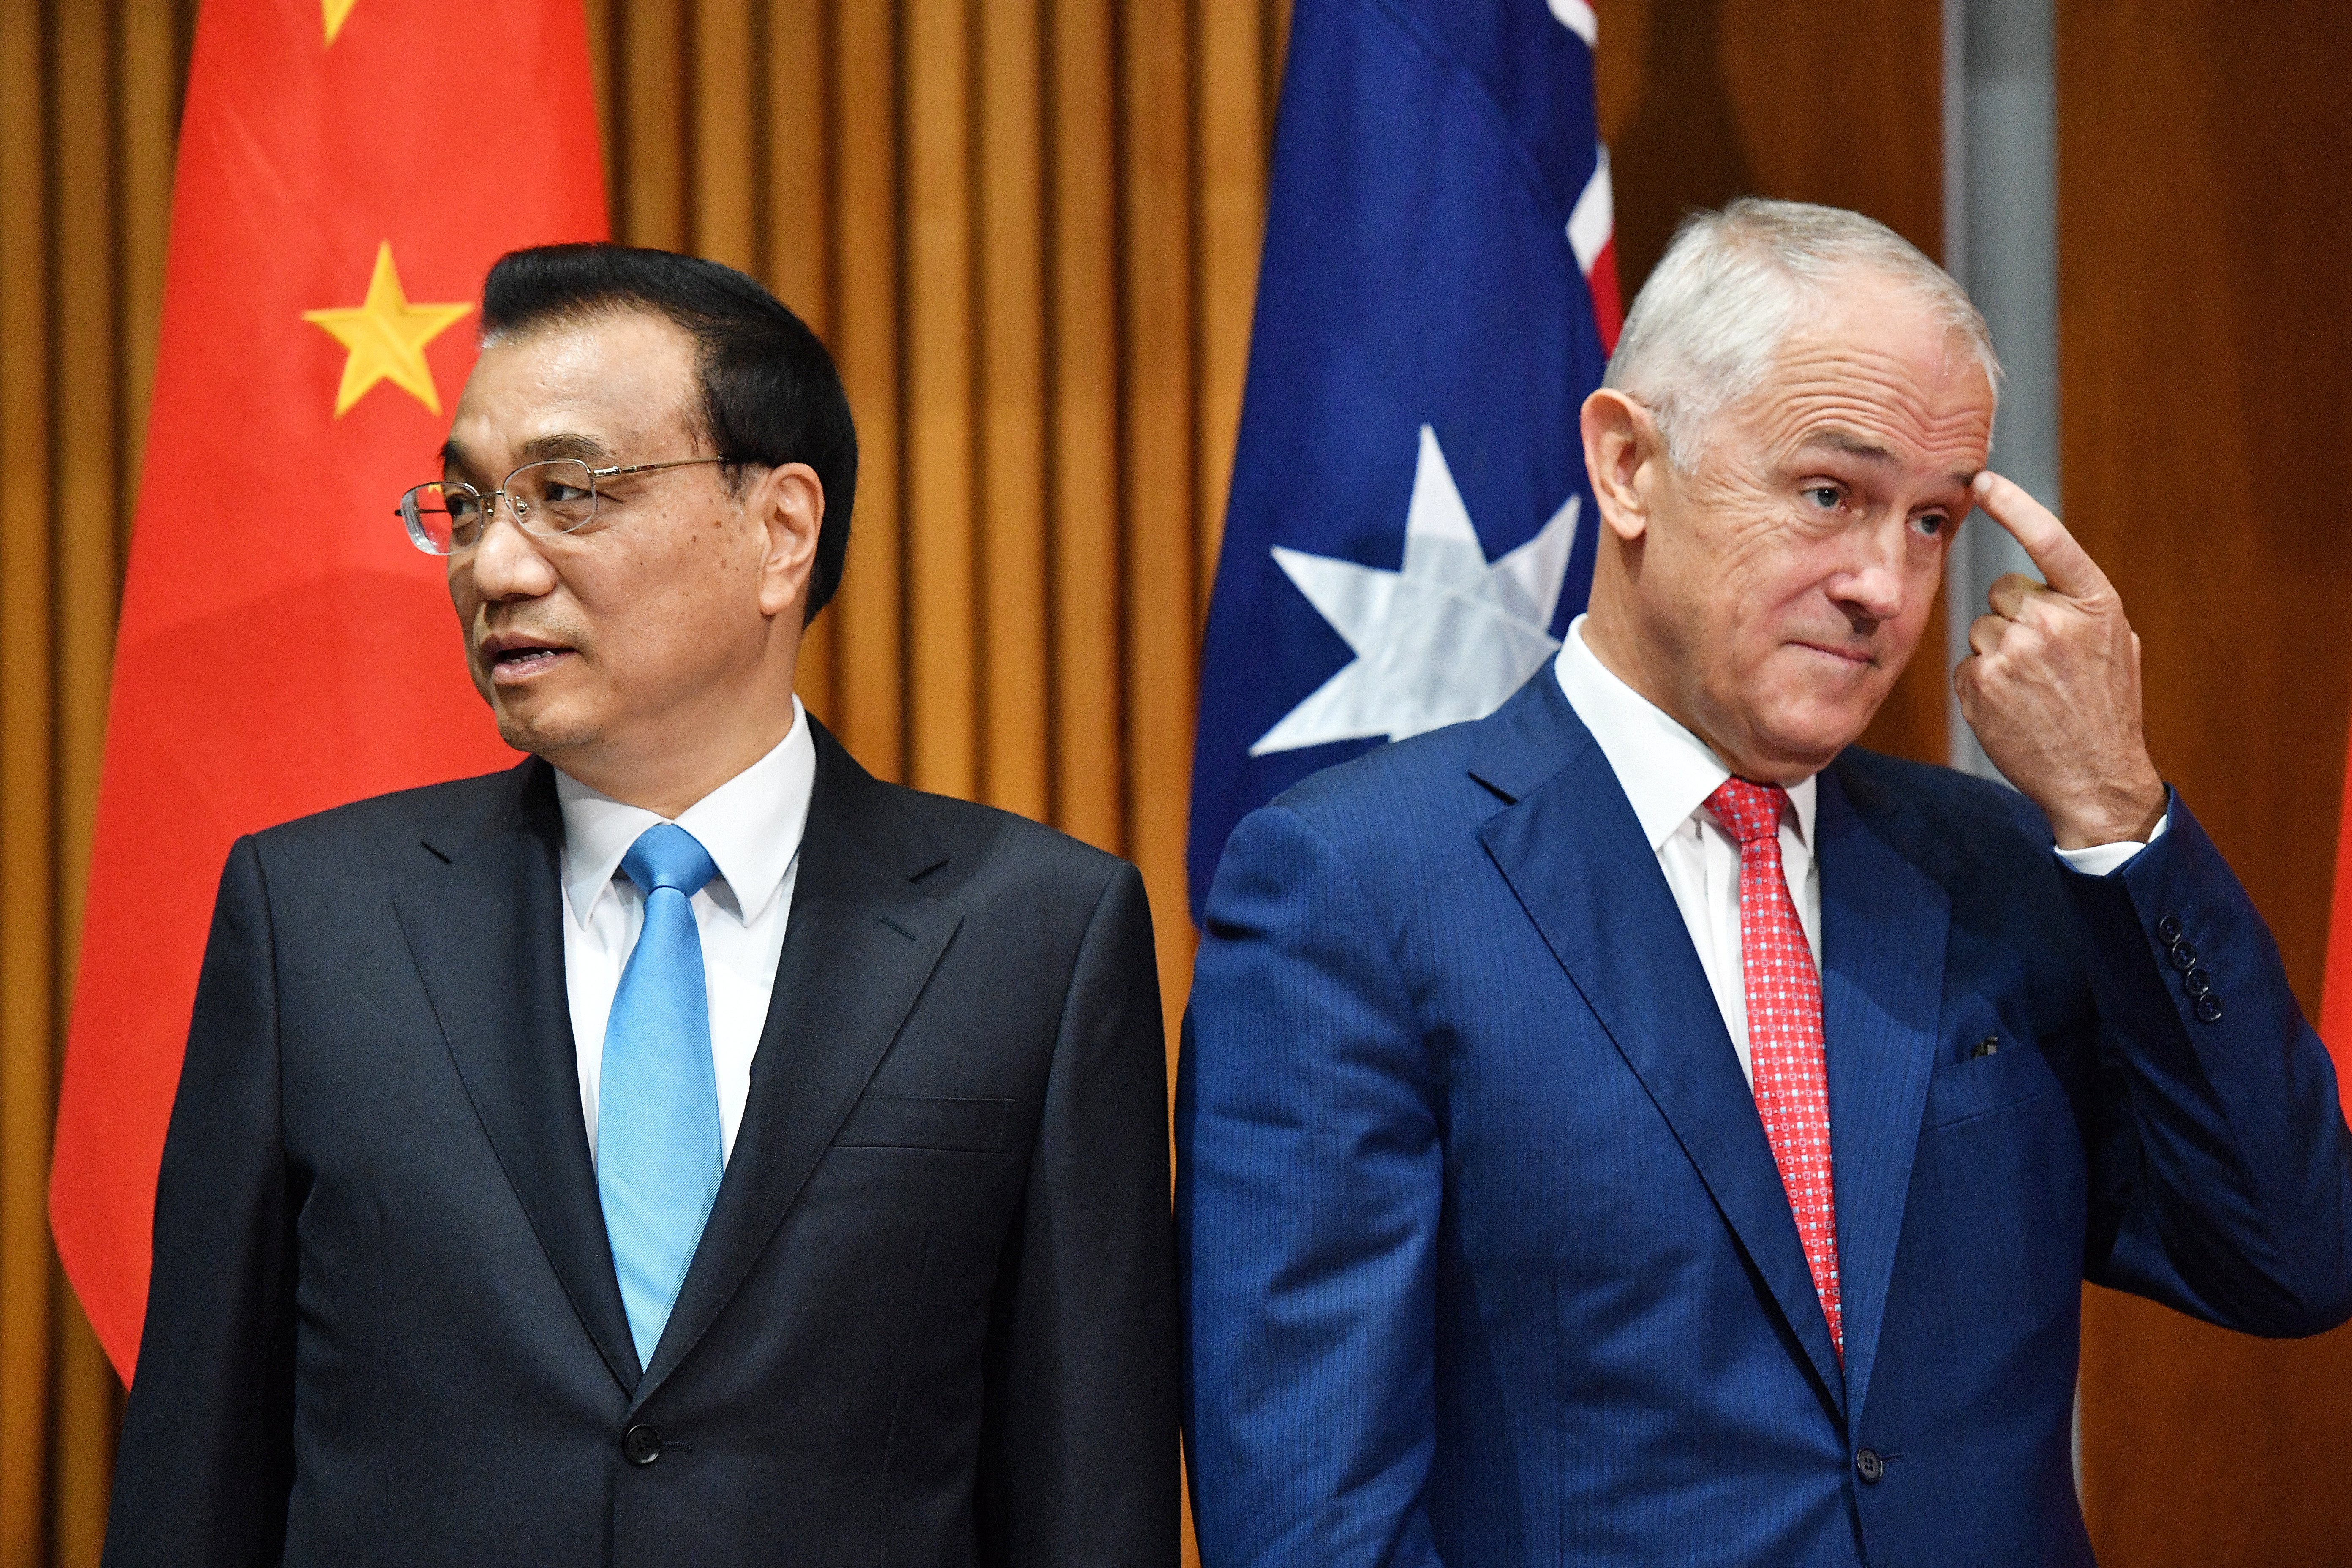 Chinese Premier Li Keqiang and Australian Prime Minister Malcolm Turnbull attend a signing ceremony in Canberra in March 2017. Australia under Turnbull has been one of the Asia-Pacific powers that is most anxious about China’s rise, but efforts to strengthen ties with a Donald Trump-led US have also been fraught. Photo: EPA